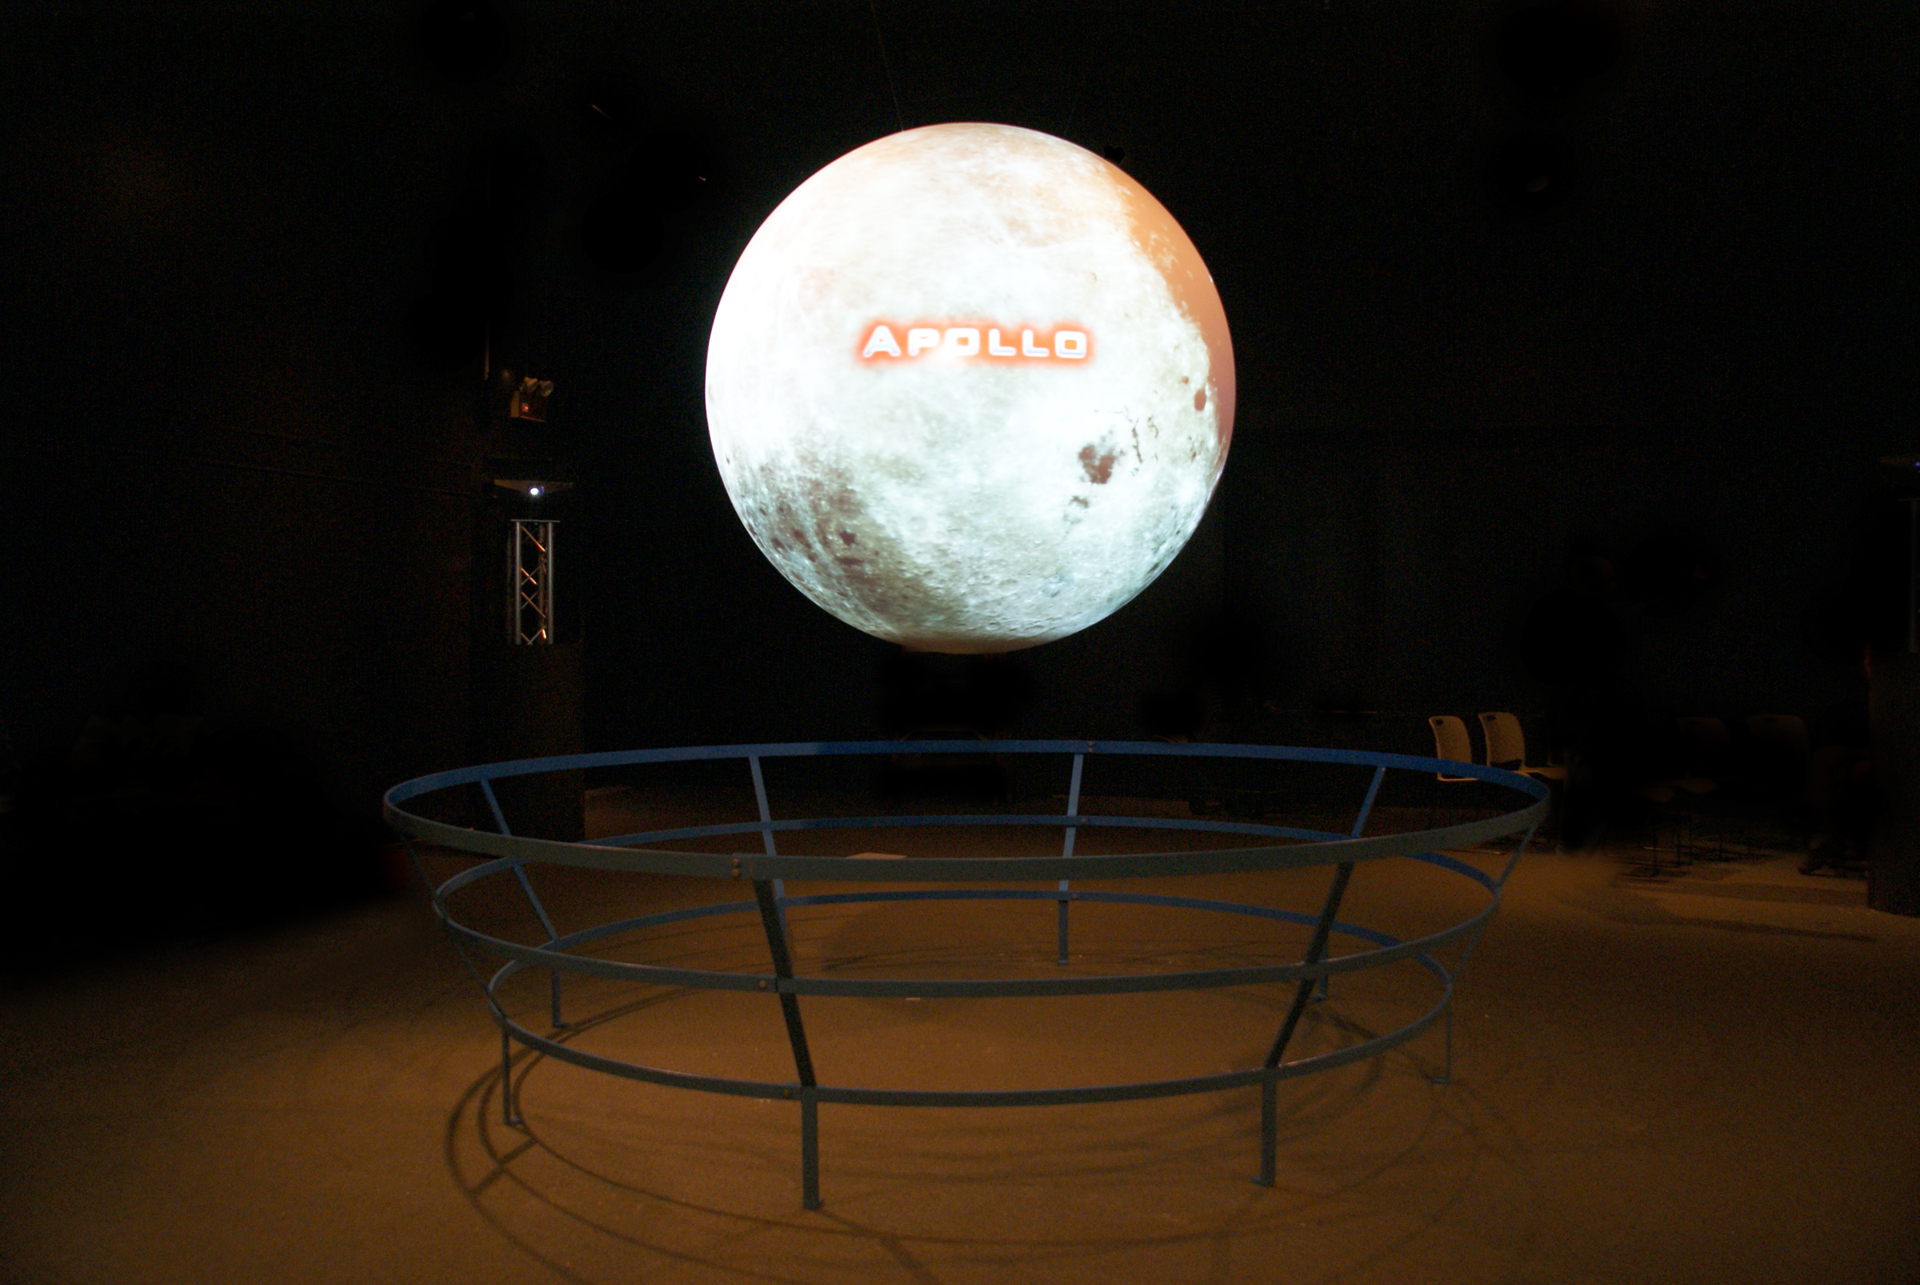 Science On a Sphere hangs in an empty room, the word 'Apollo' is visible on the Sphere